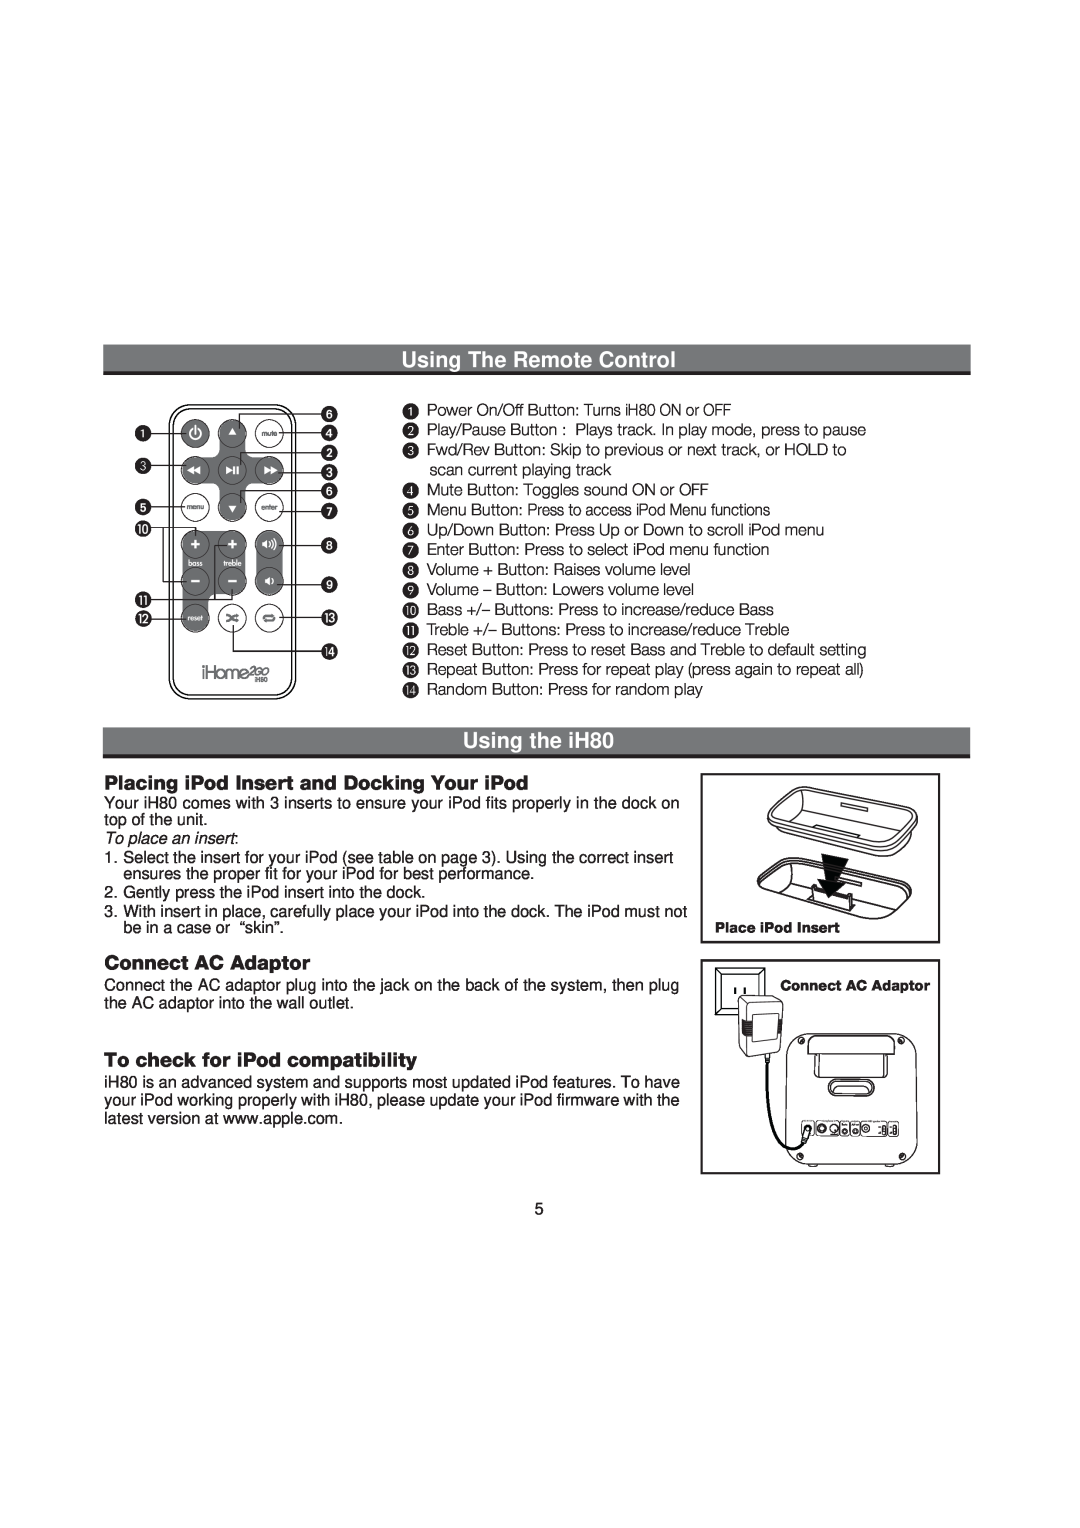 iHome manual Using the iH80, Using The Remote Control, Placing iPod Insert and Docking Your iPod, Connect AC Adaptor 